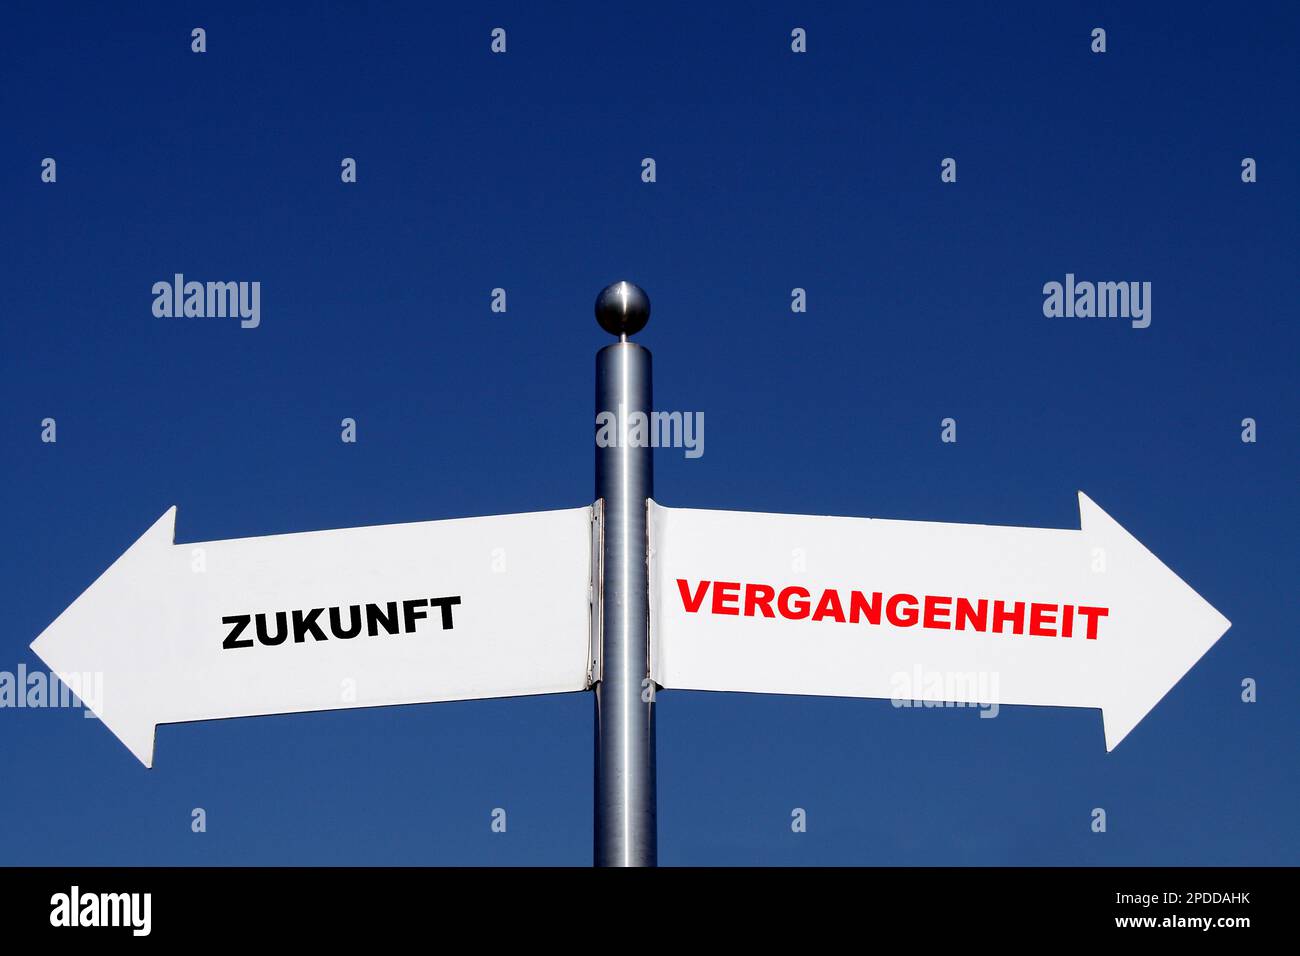 signposts pointing in different directions, options Zukunft - Vergangenheit, future - past Stock Photo